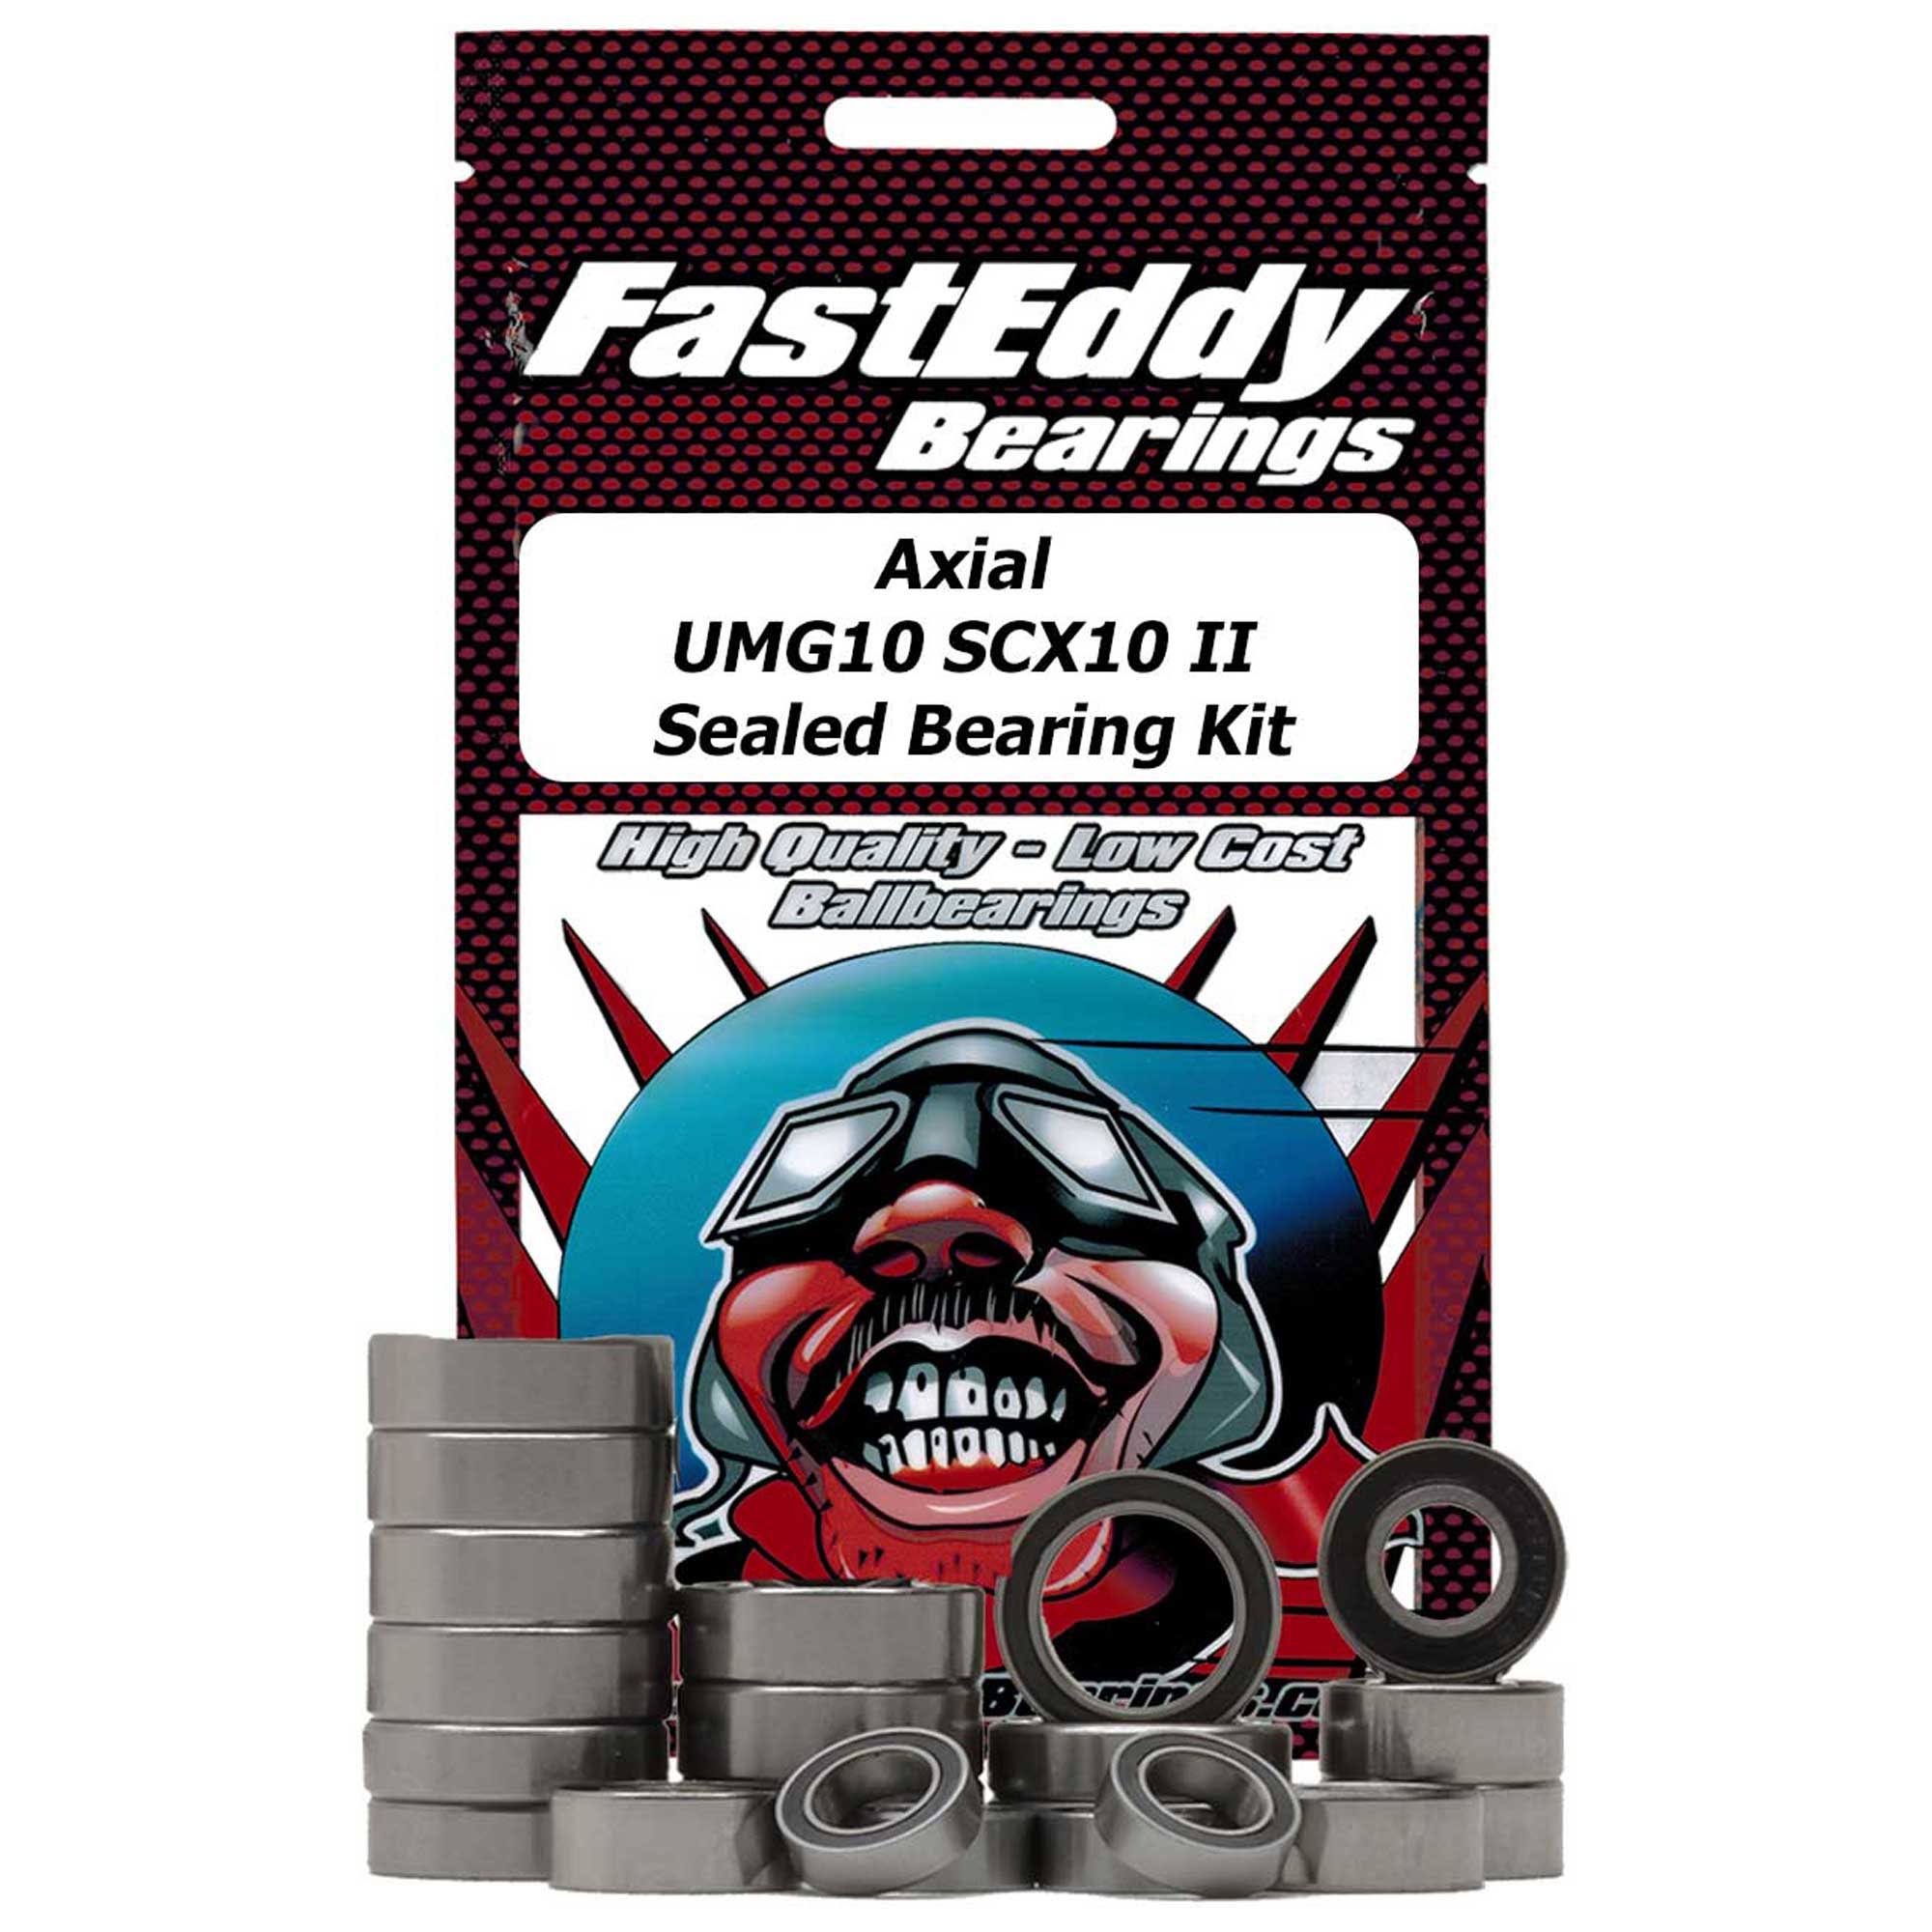 FastEddy Bearings for The Axial UMG10 Scx10 II Sealed Bearing Kit